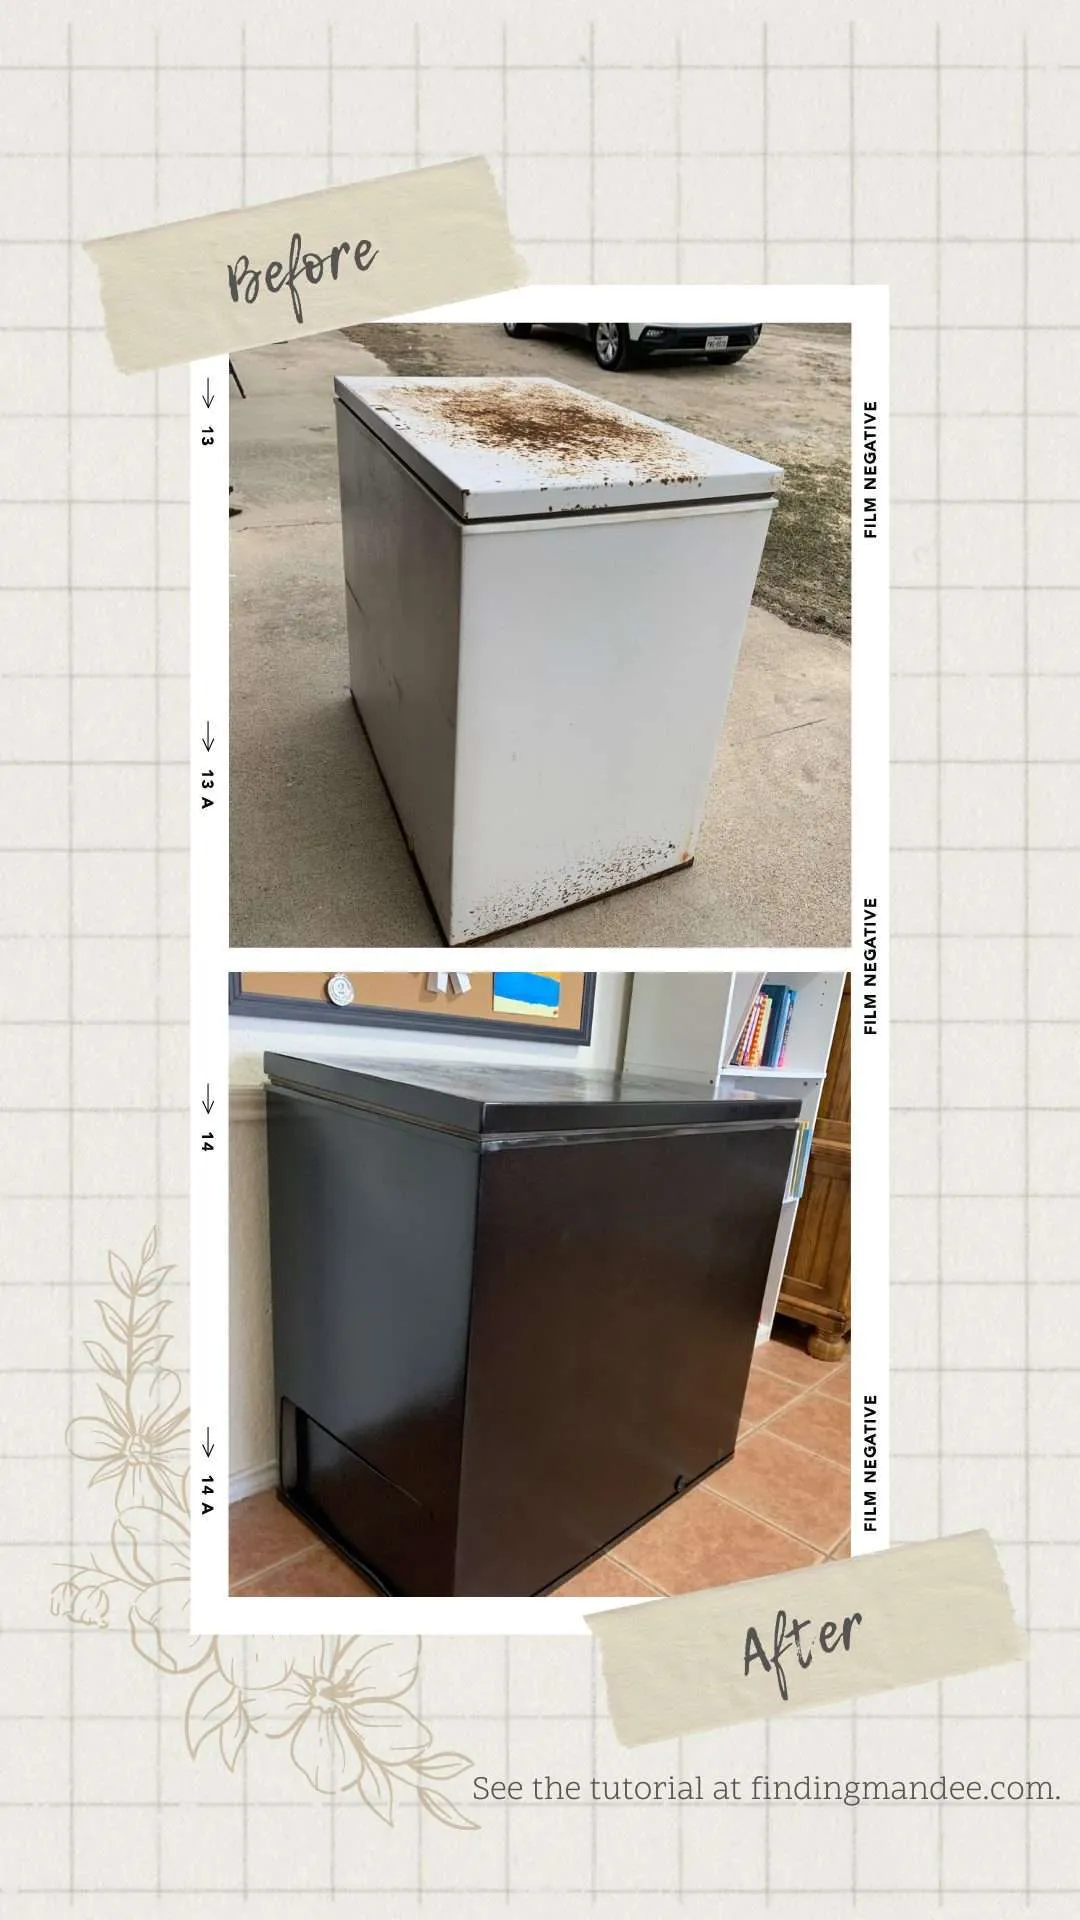 Before and after painting rusty appliances